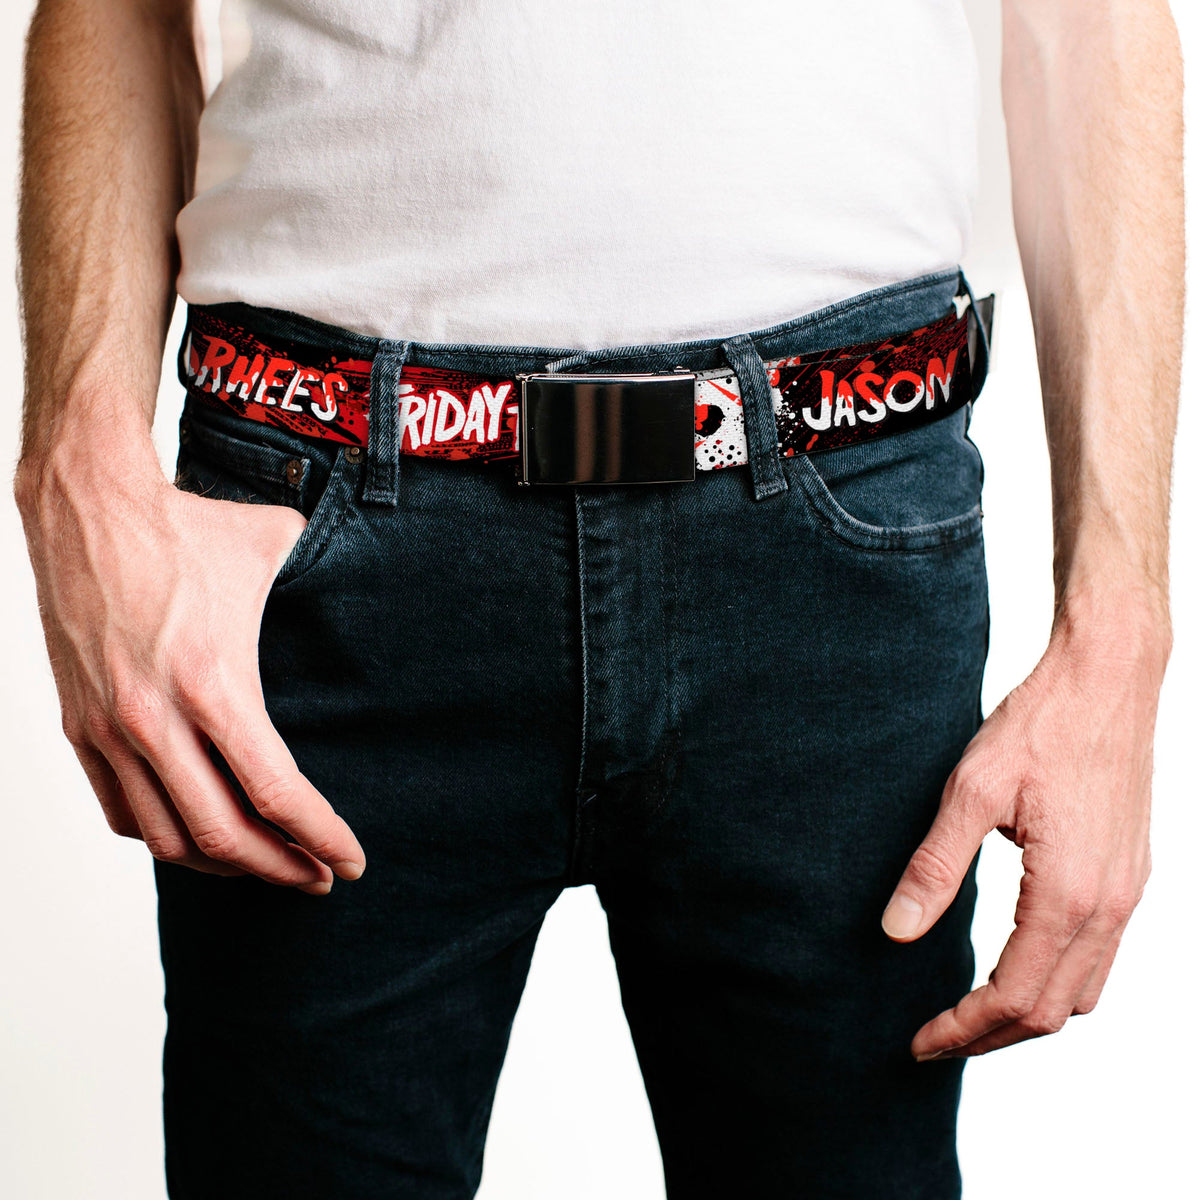 Web Belt Blank Black Buckle - FRIDAY THE 13TH JASON VOORHIES Mask Text Black/Red/White Webbing